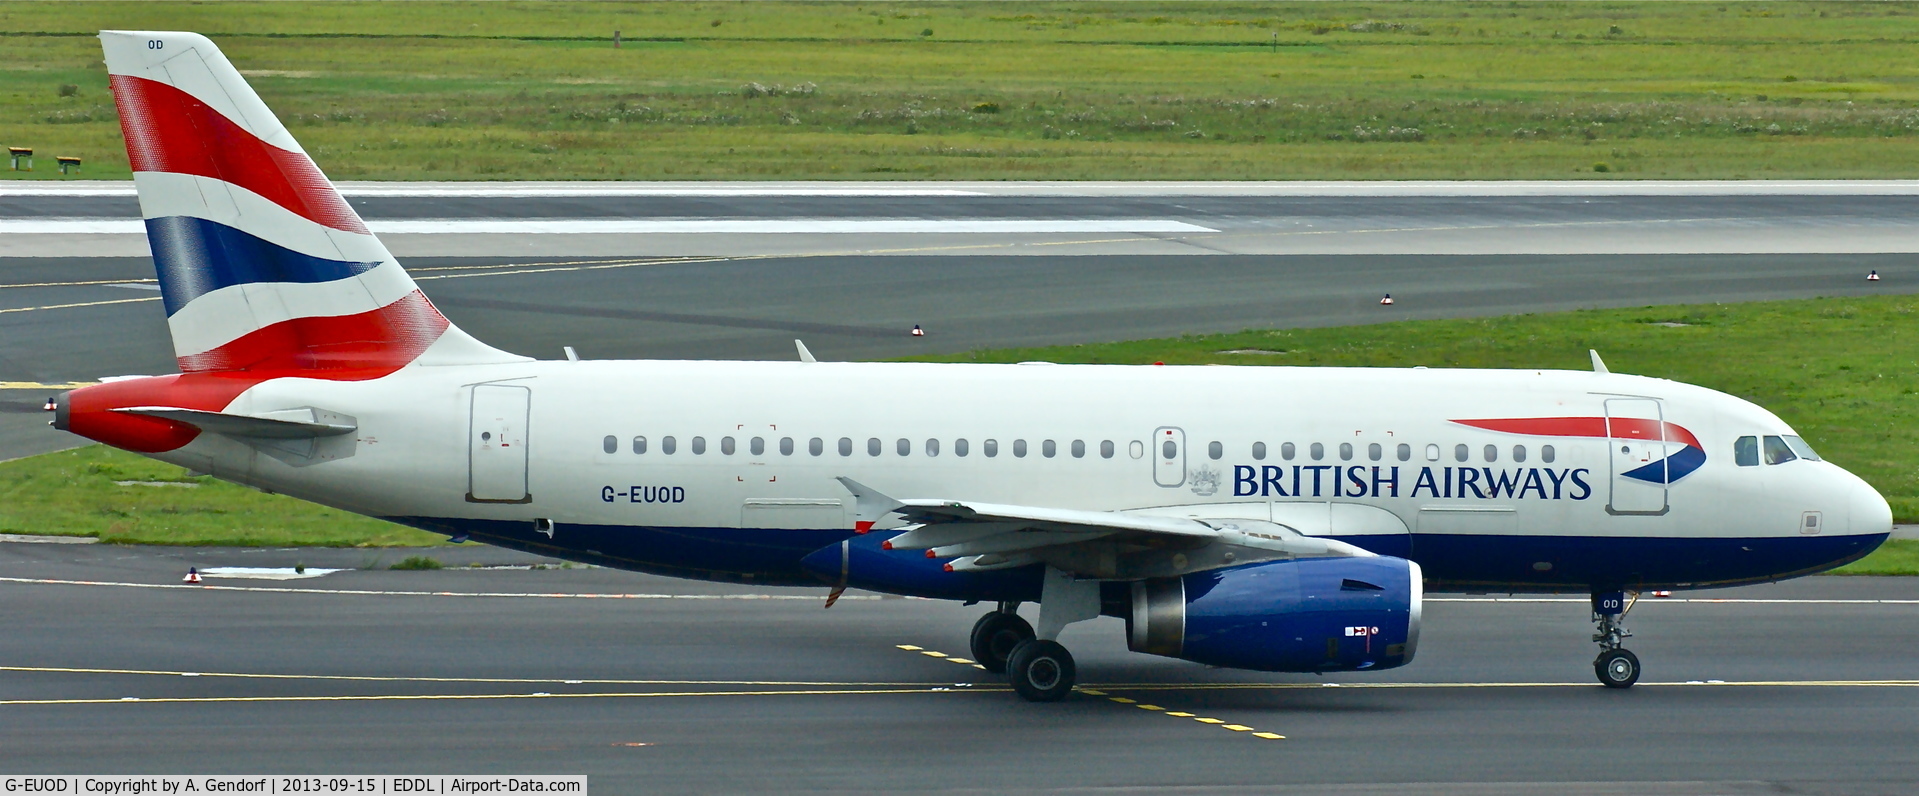 G-EUOD, 2001 Airbus A319-131 C/N 1558, British Airways, is here on the taxiway at Düsseldorf Int´l(EDDL)